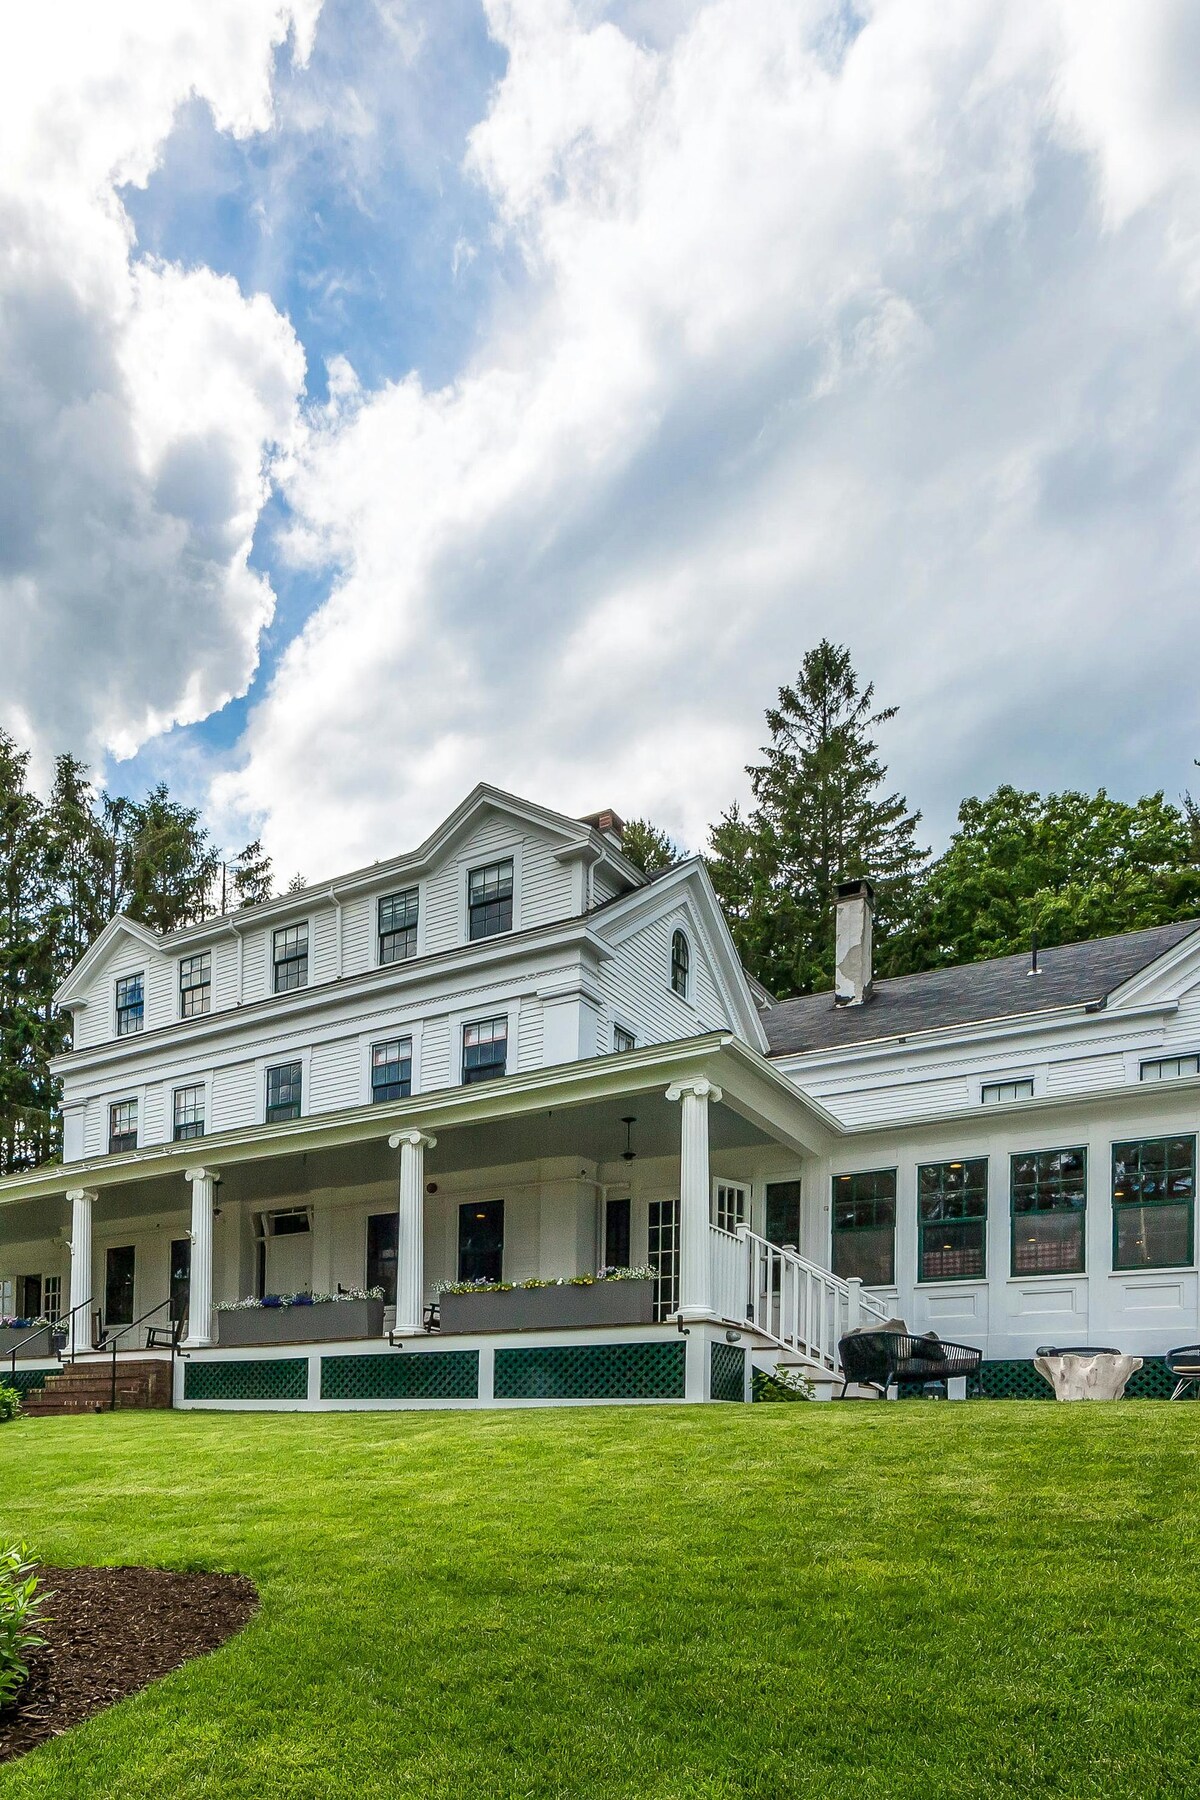 A jewel in the Midcoast Maine crown